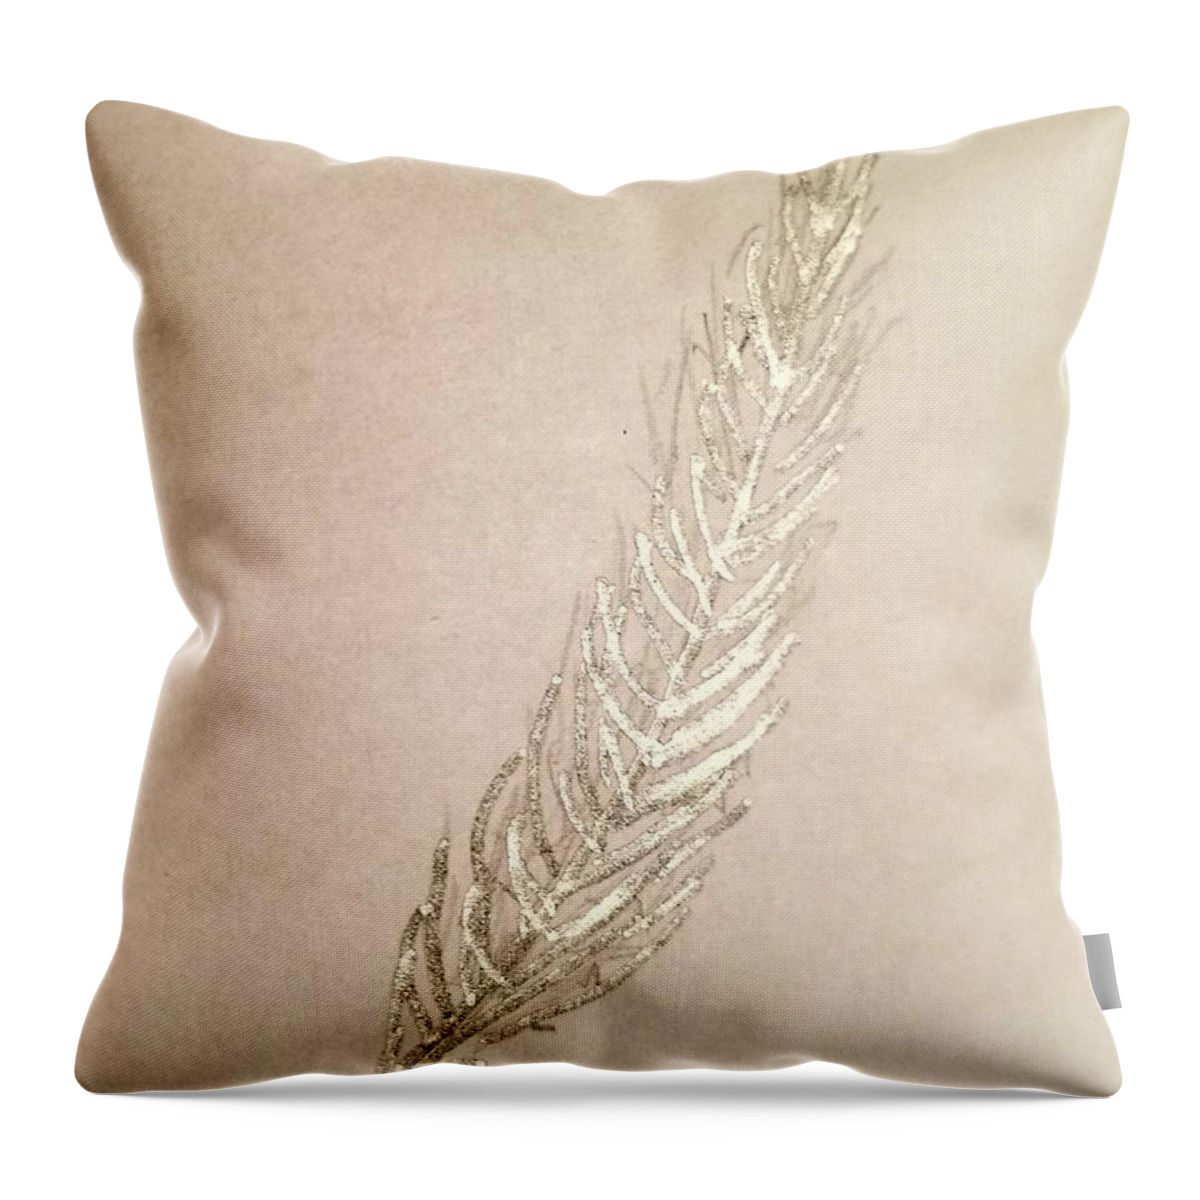  Throw Pillow featuring the painting Golden Phoenix by Margaret Welsh Willowsilk